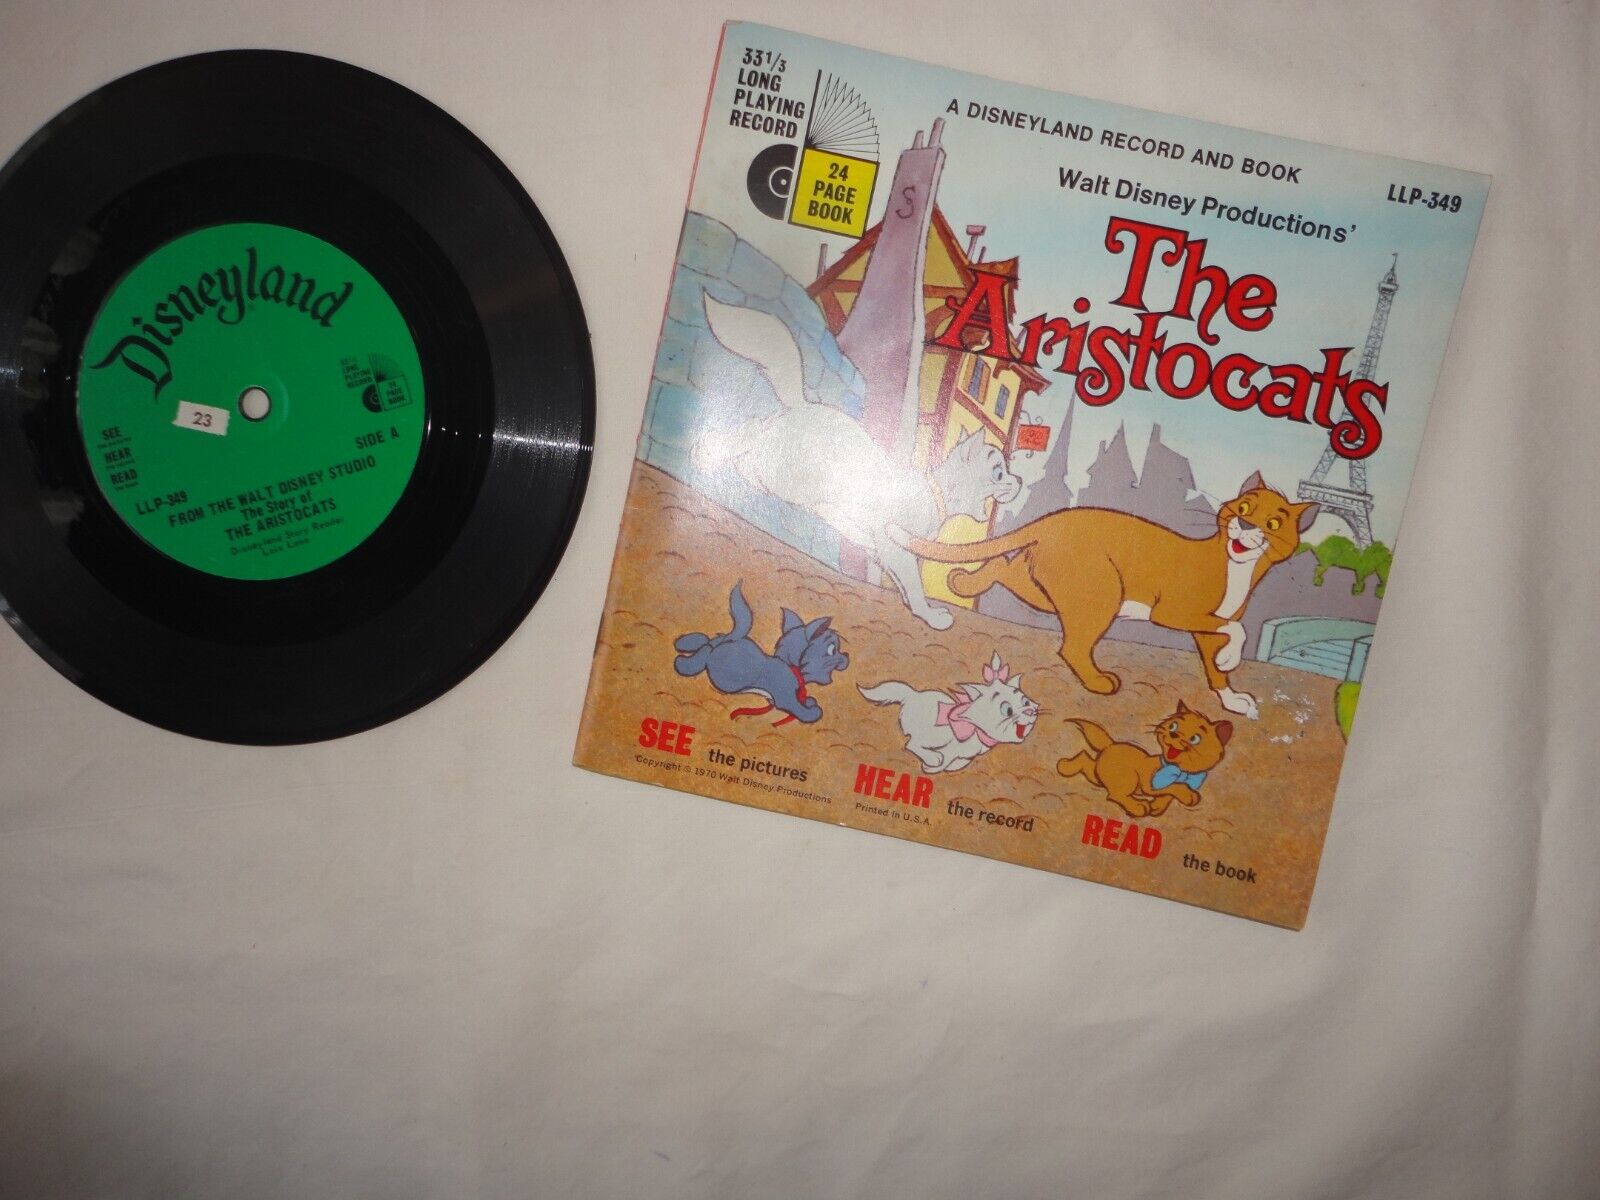 Vintage 1970 Disneyland Record and Book The Aristocrats